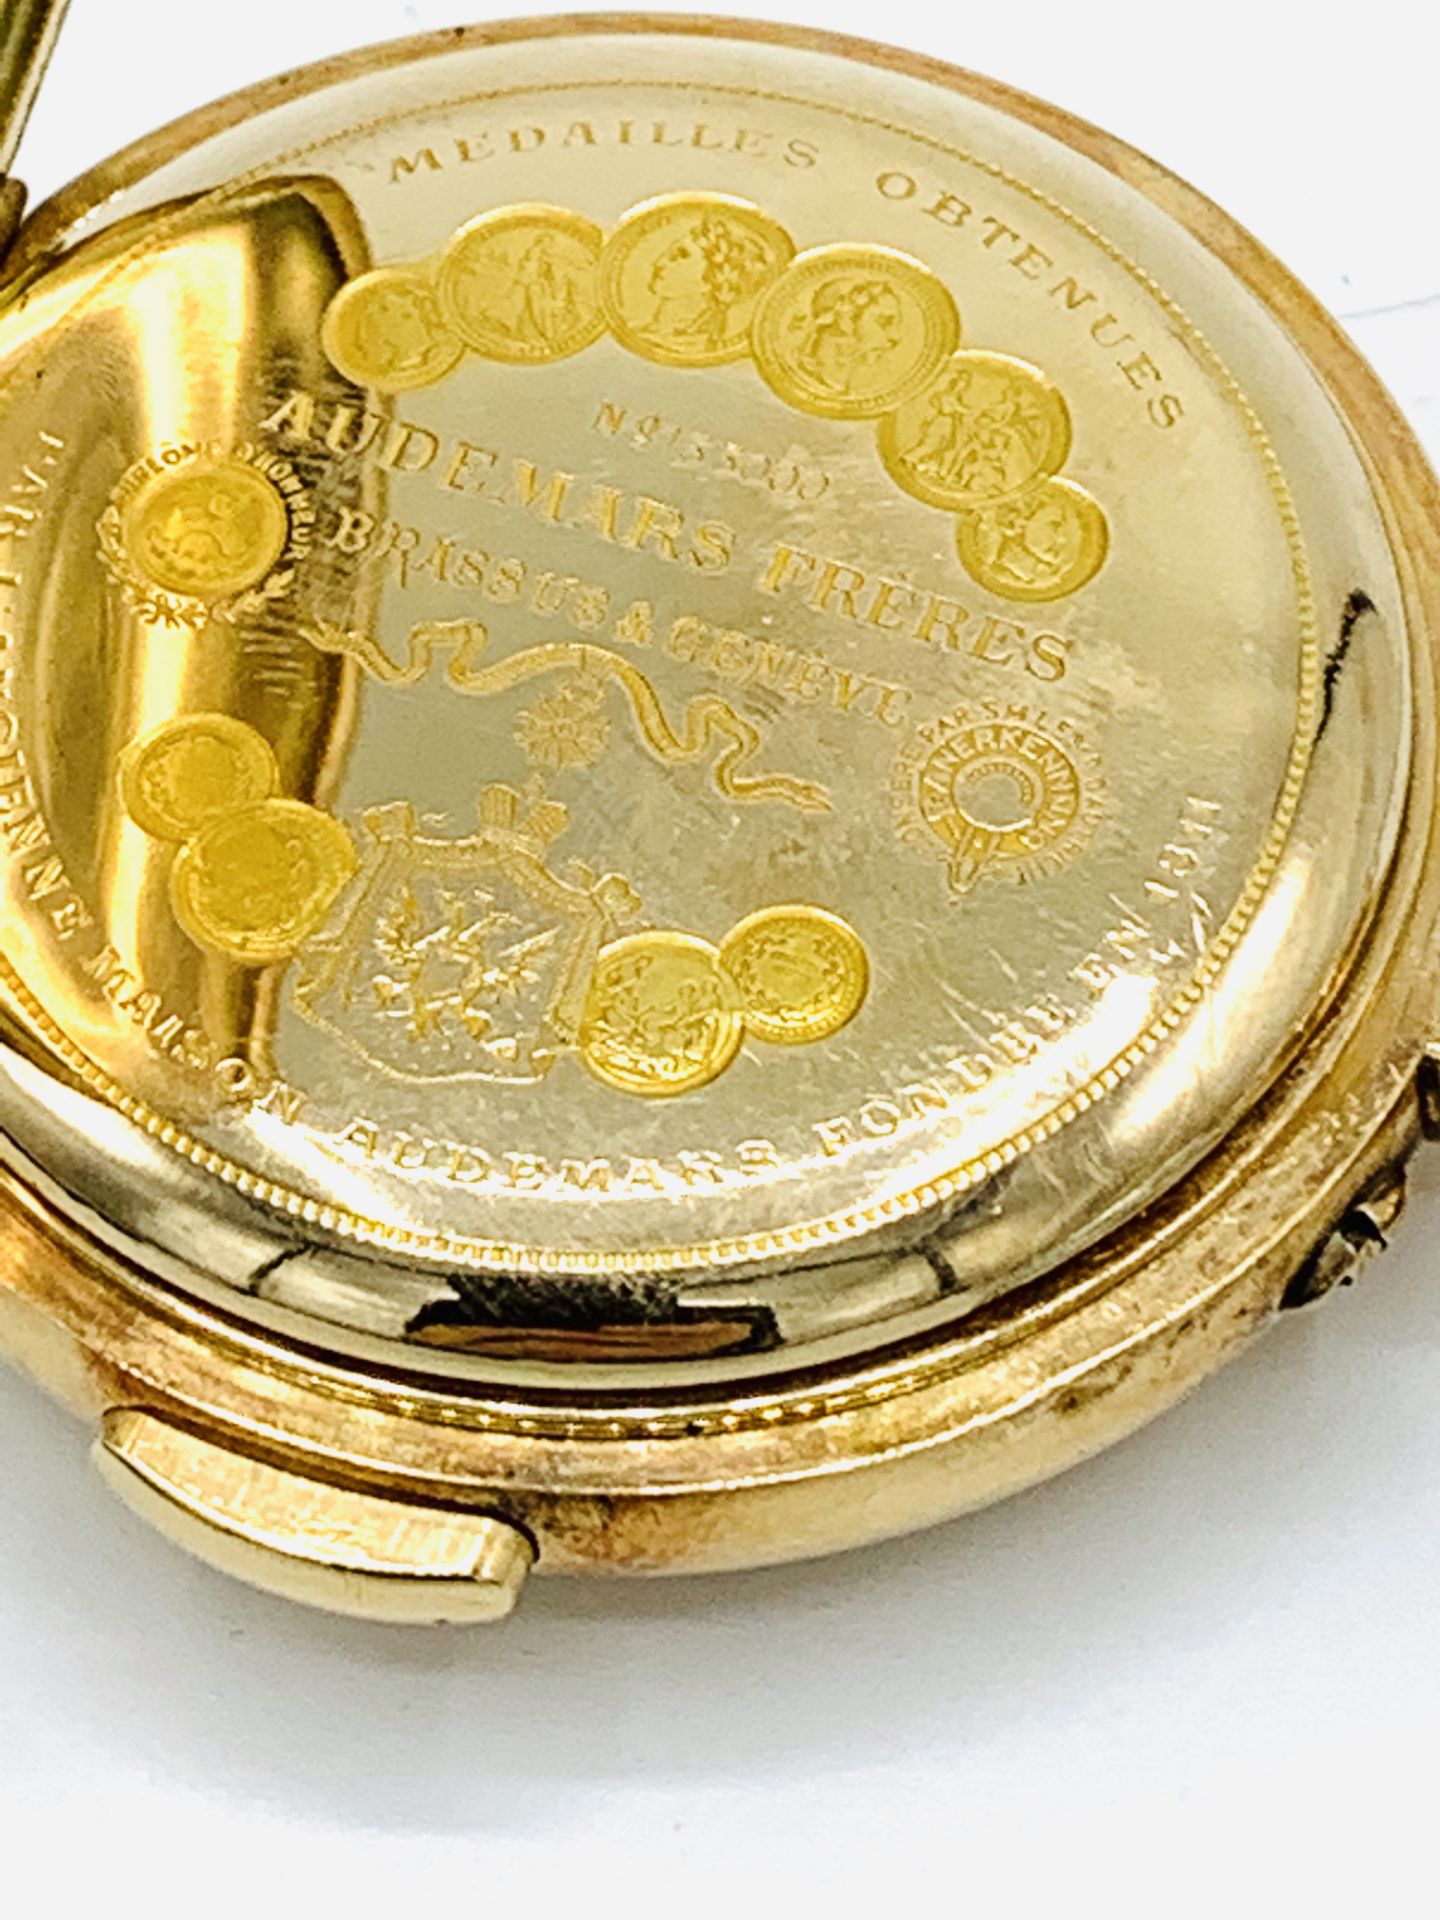 18ct gold chiming repeater pocket watch by Audemars Freres, Brassus, Geneve - Image 4 of 7